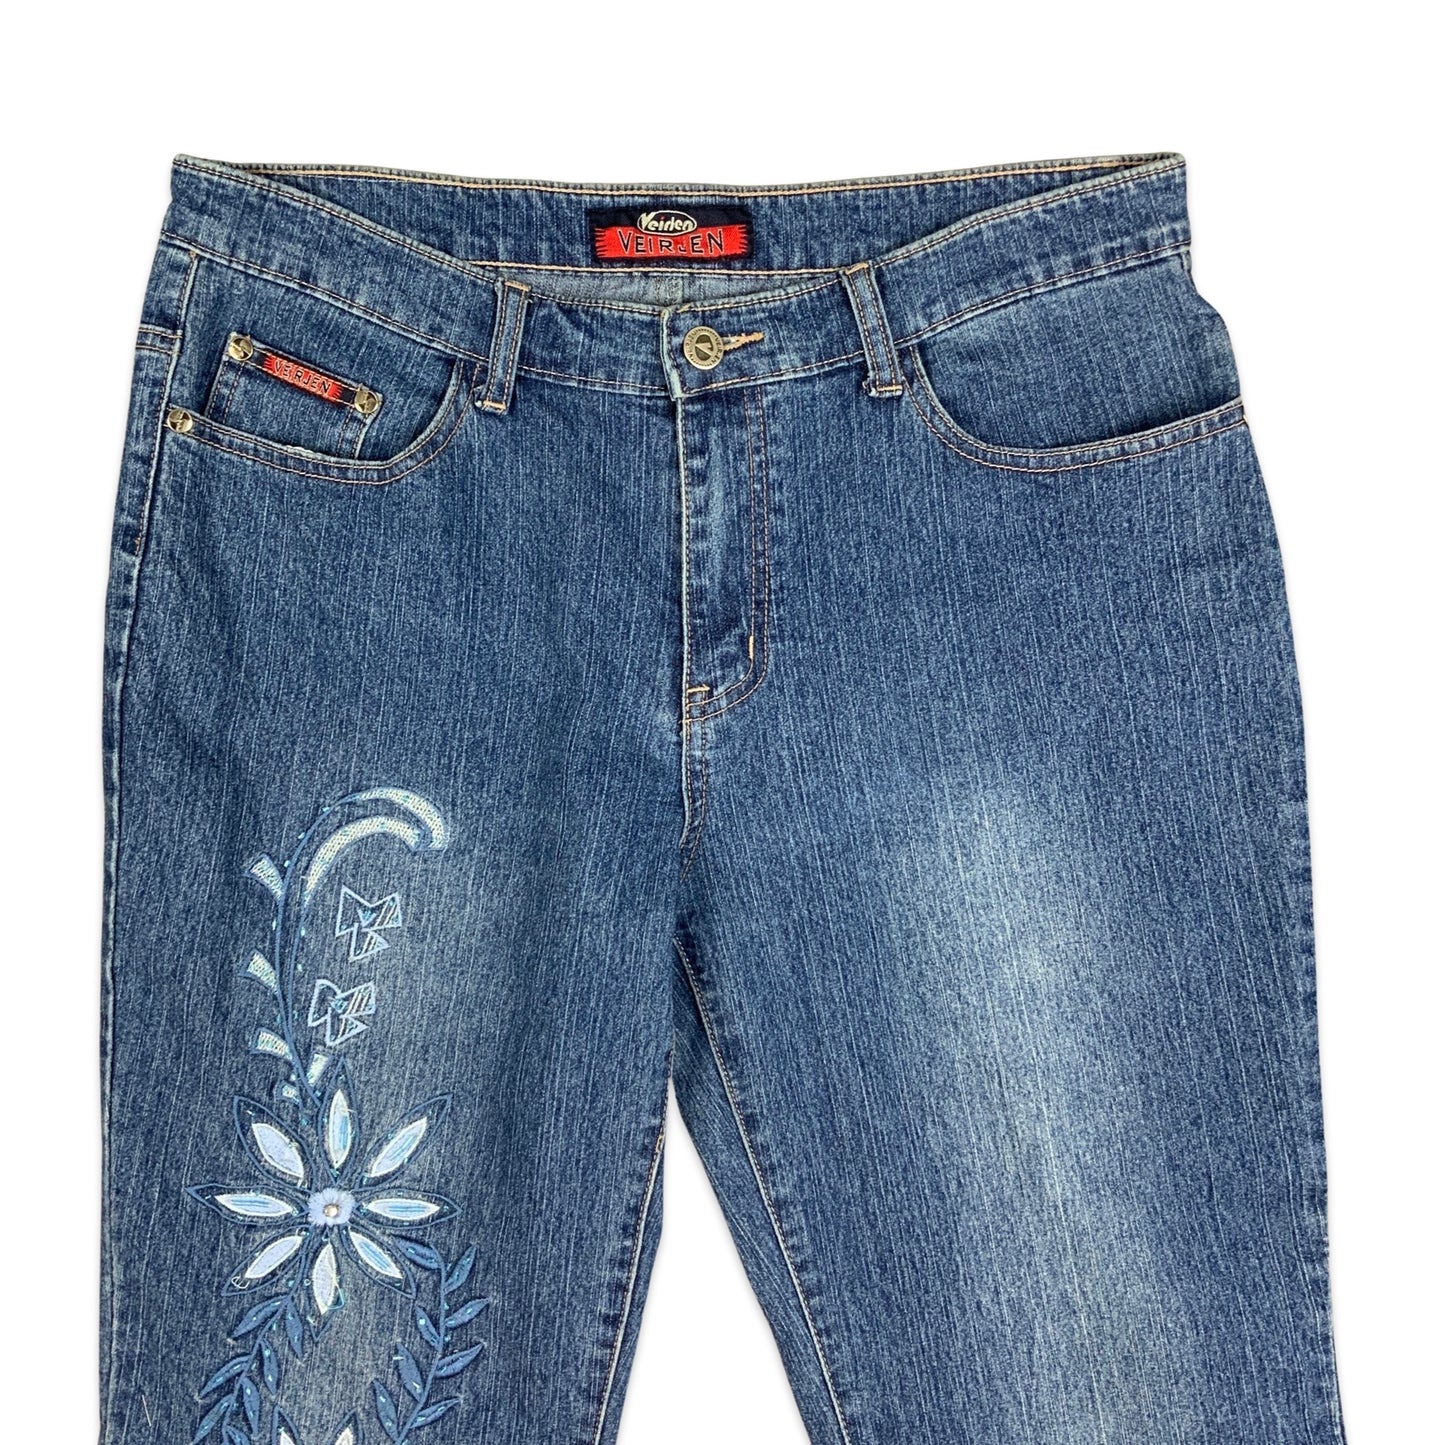 Y2K Low Rise Bootcut Denim Jeans with Floral Embroidery 12 14